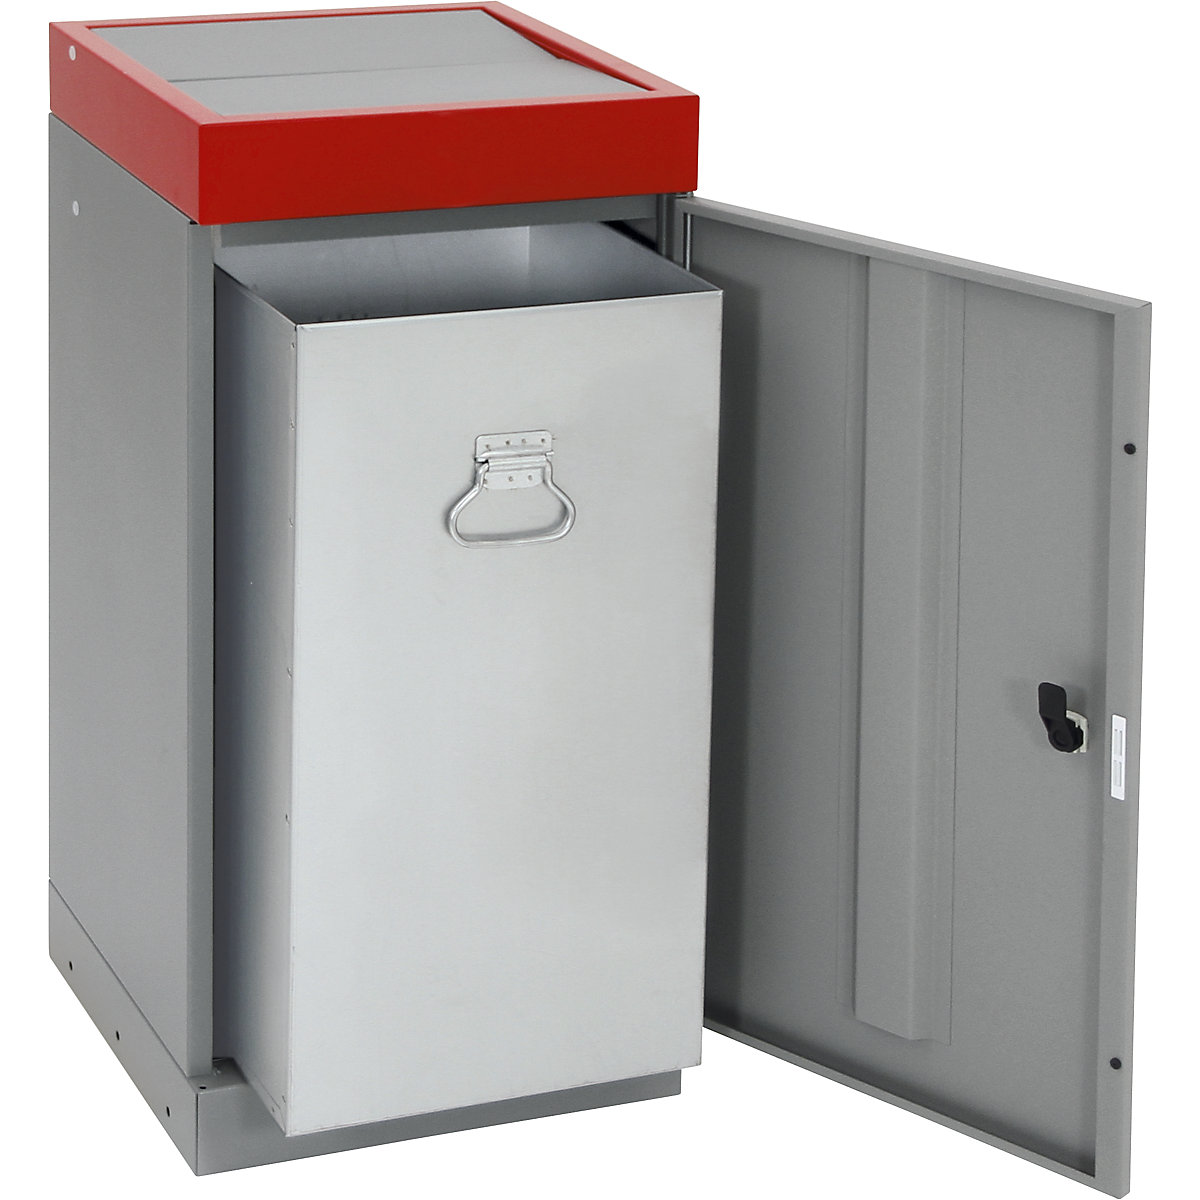 Recyclable waste collector with swing lid, individual unit, capacity 70 l, lid colour red / white aluminium-10